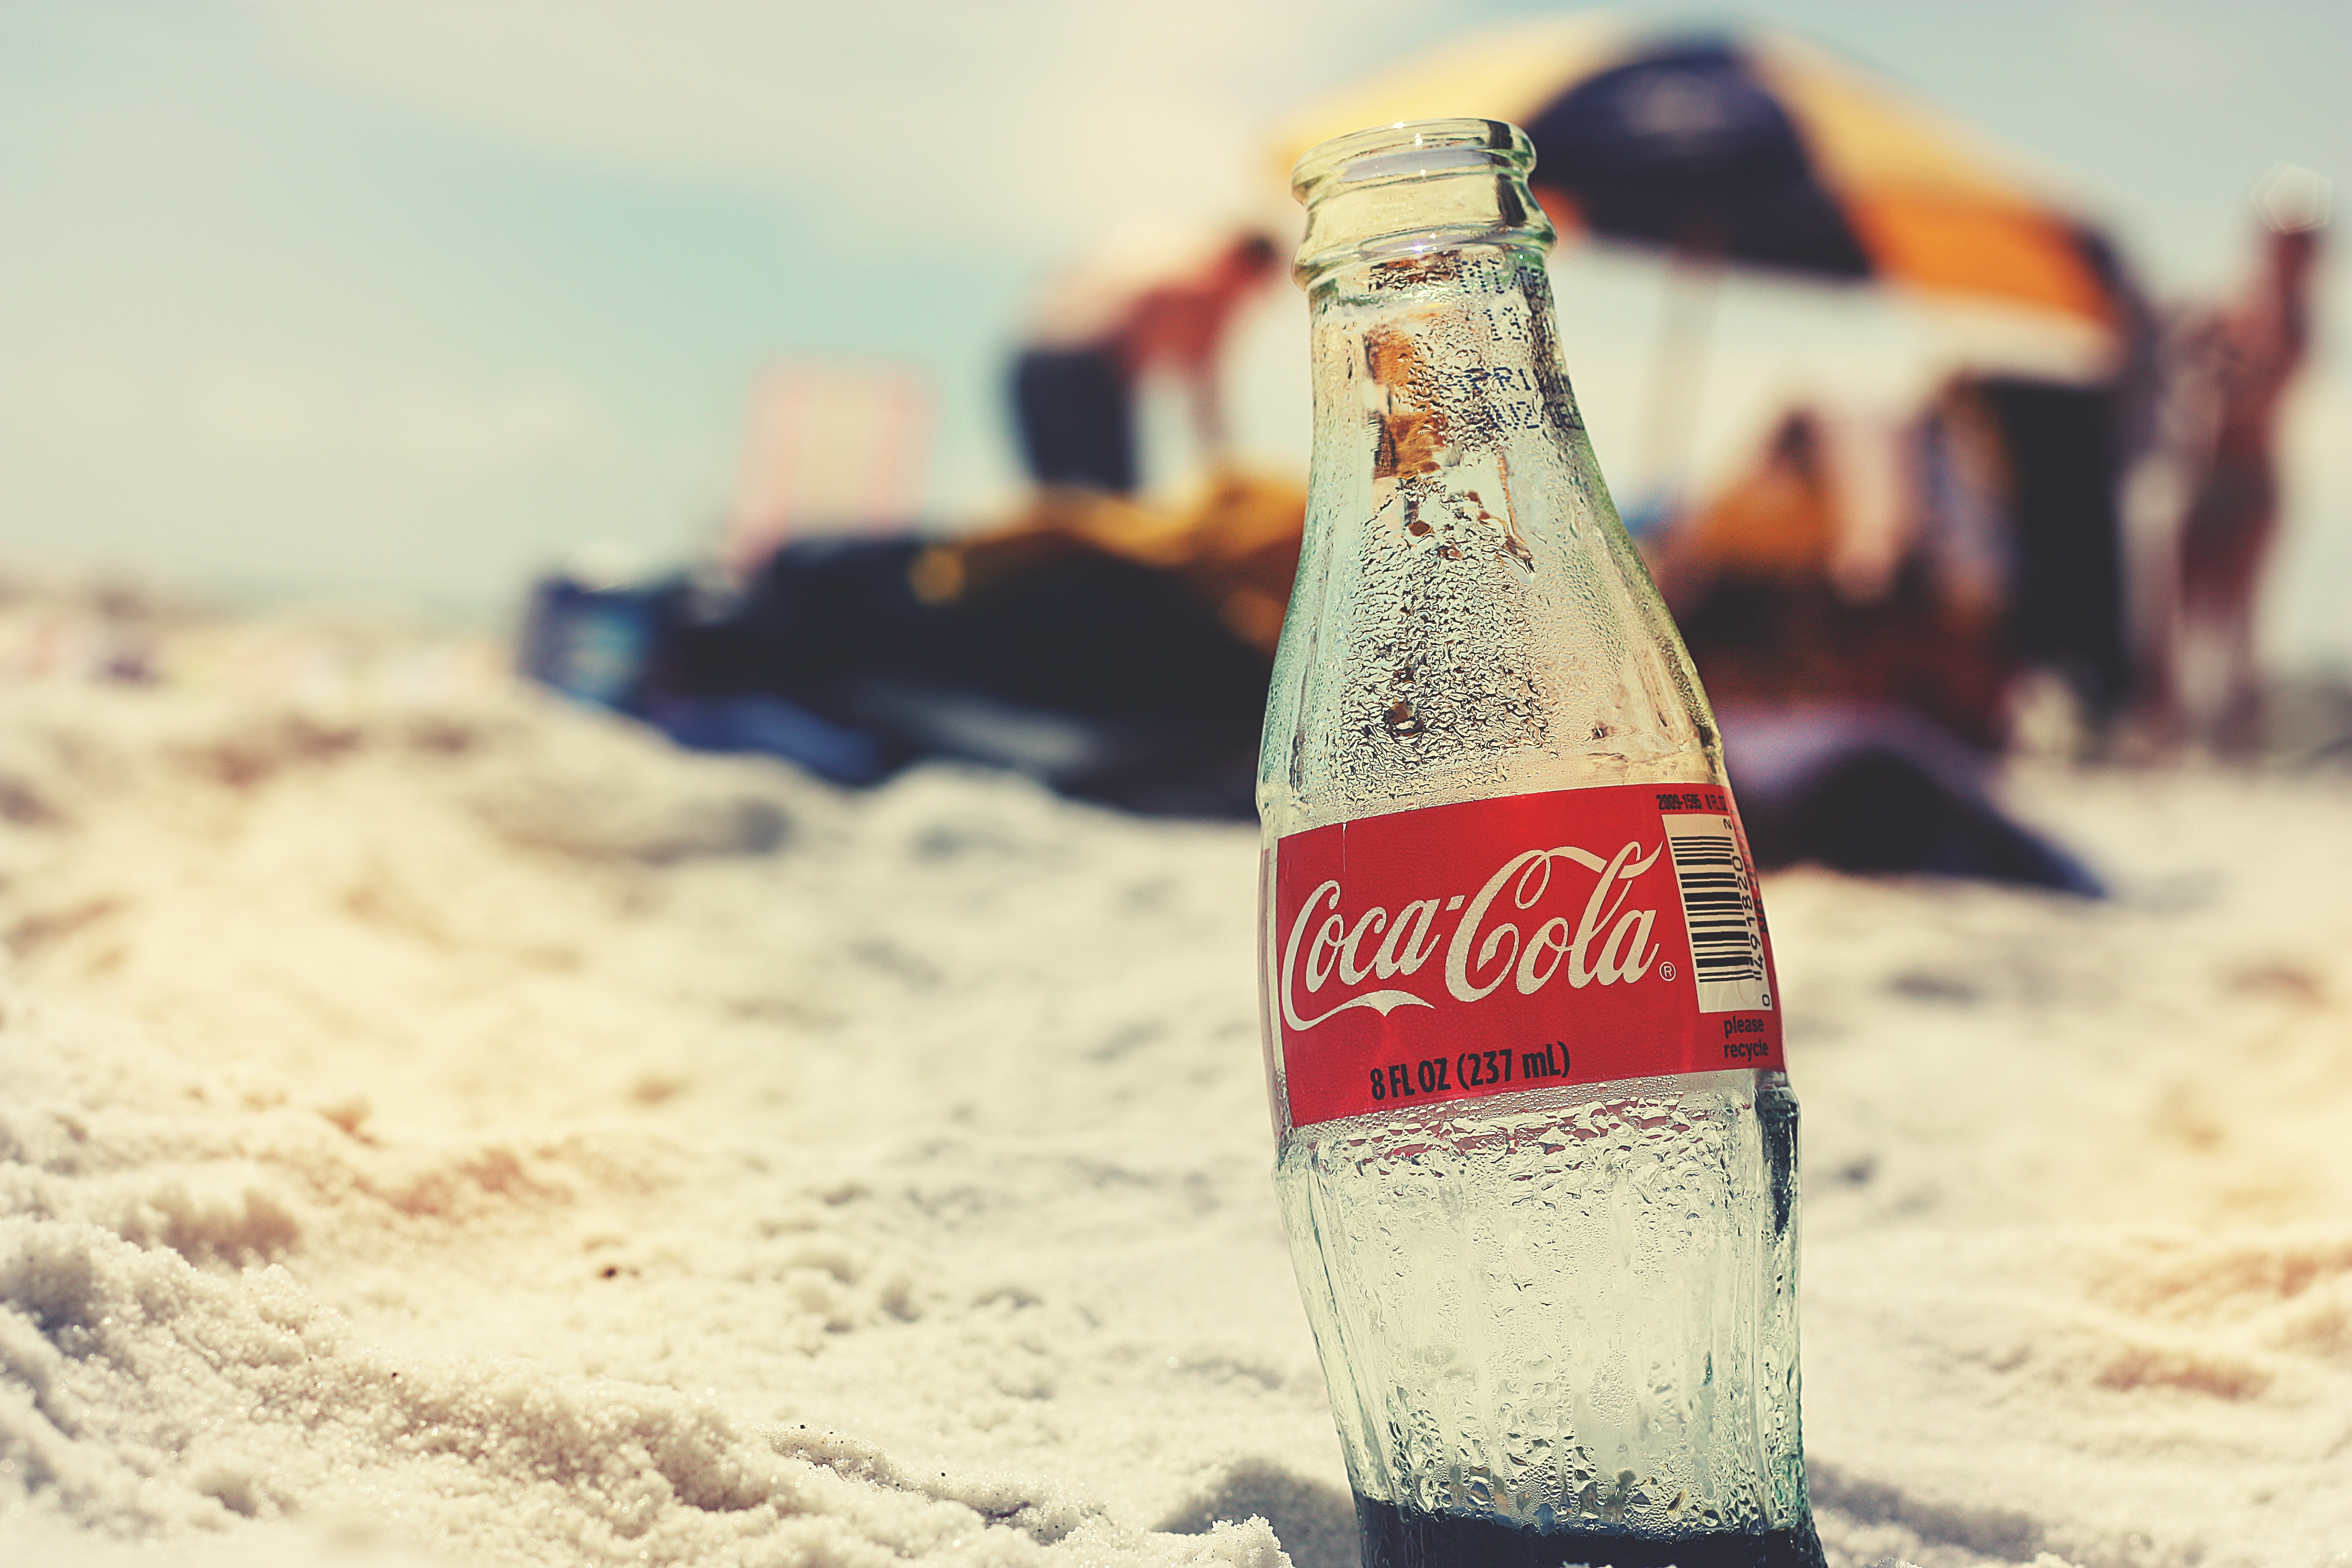 A bottle of cola buried in the sand.